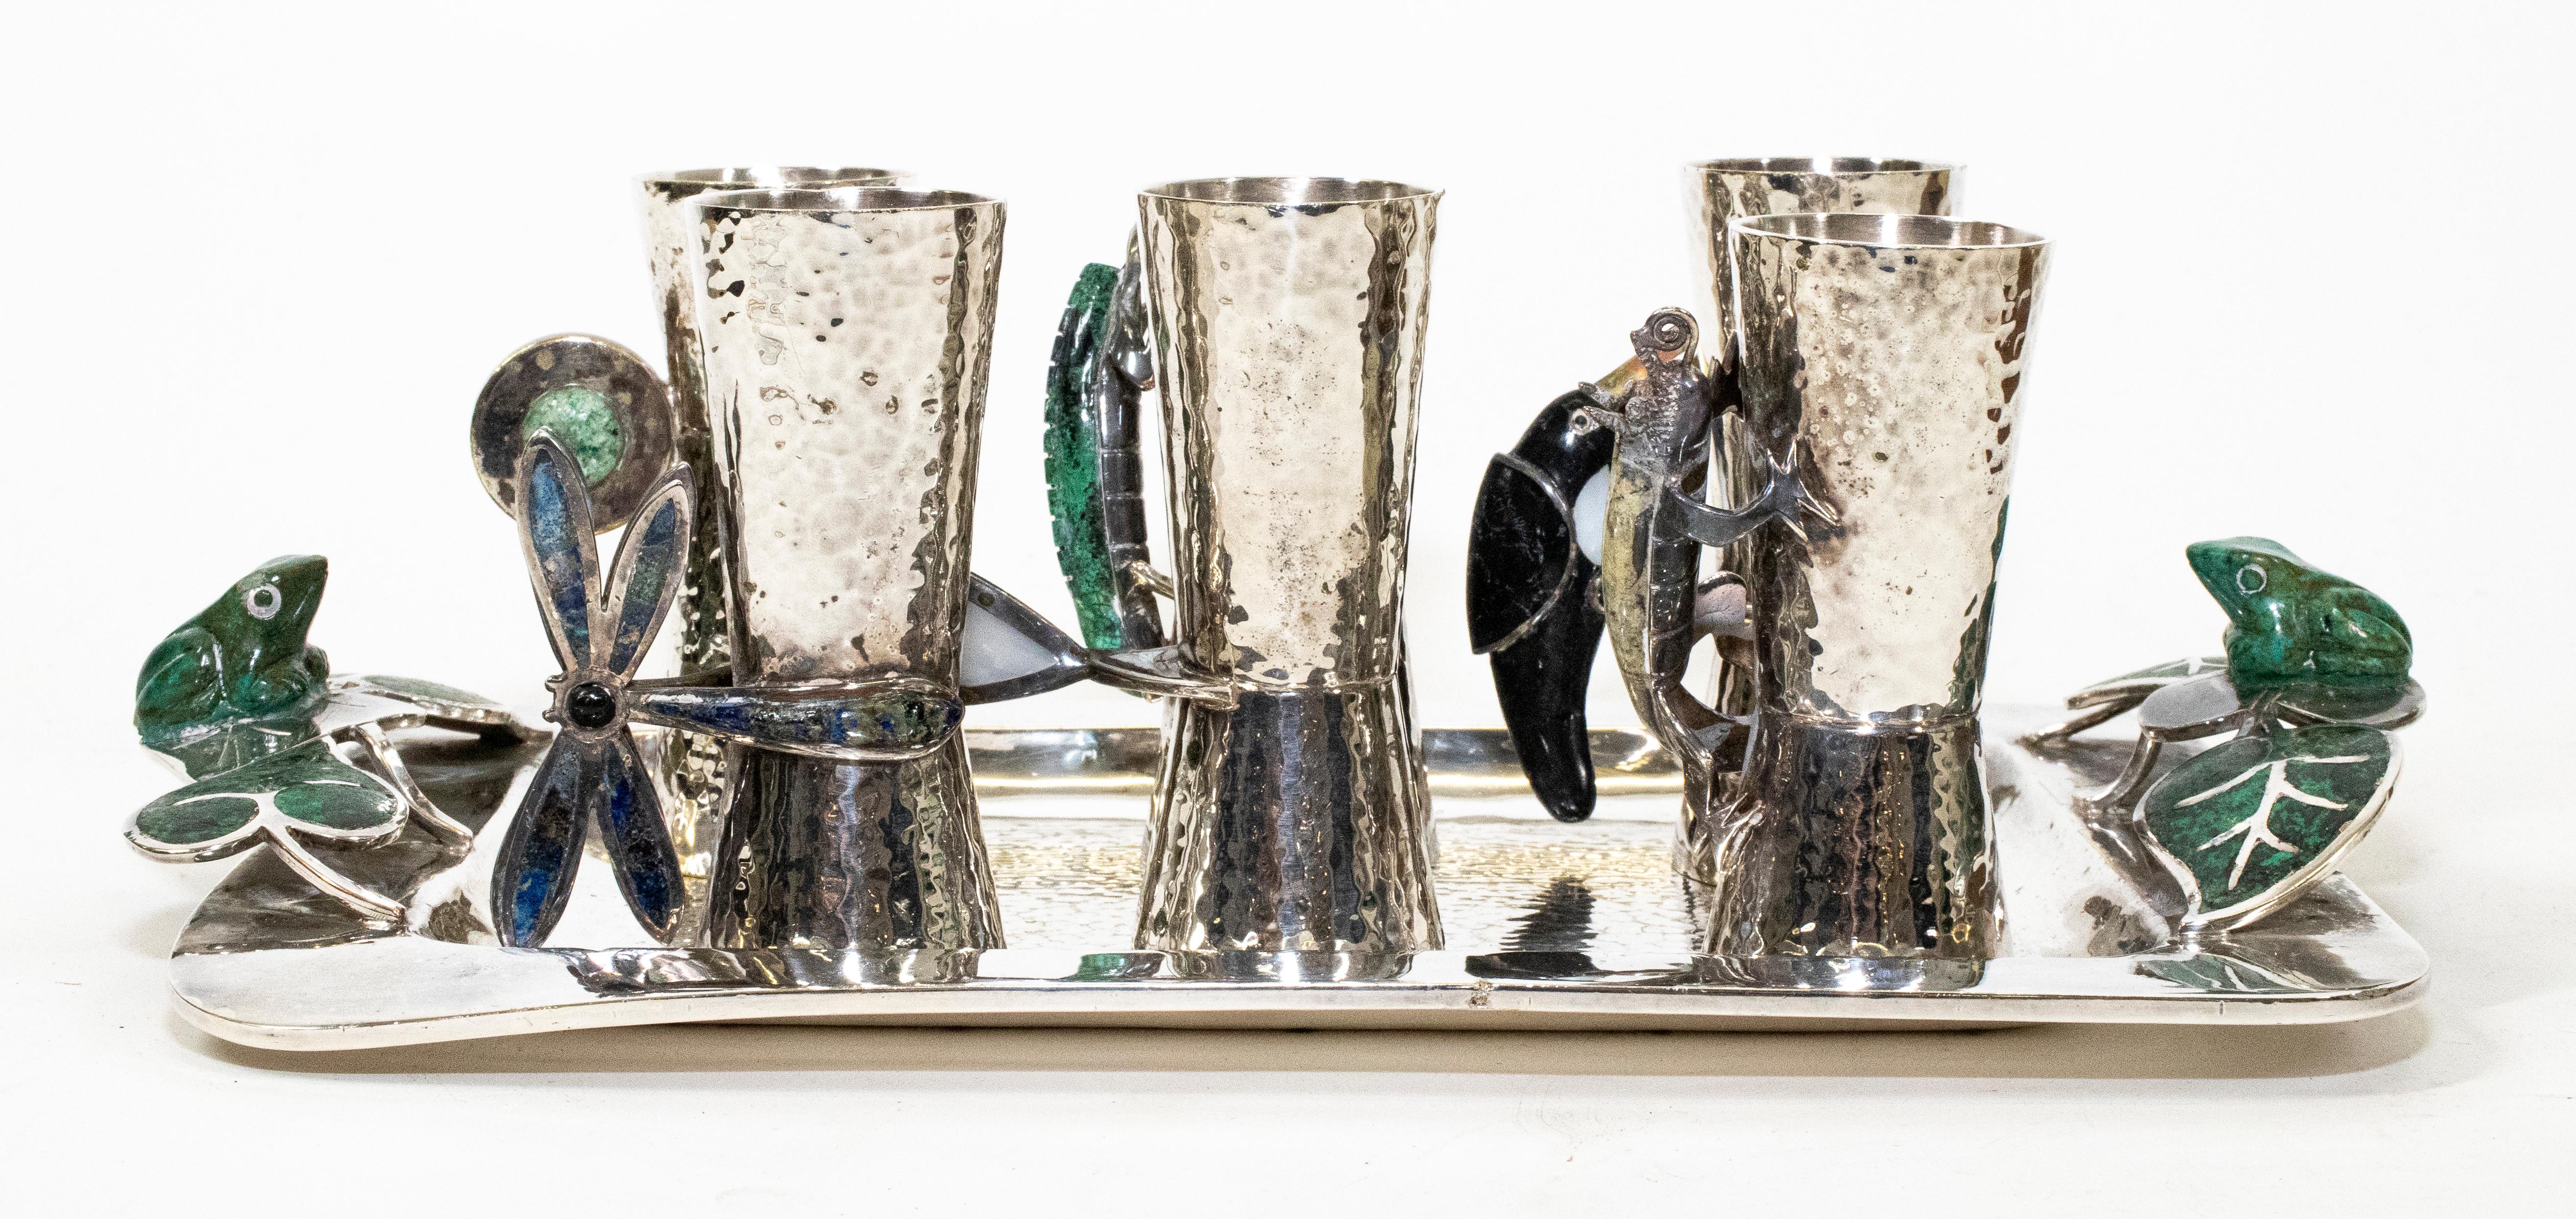 Lost Castillo Mexican silver plate hand pounded tray with 6 matching silver plate shot glasses. Tray has semiprecious malachite frogs sitting on lily pads. Each silver plate shot glass has a handle with semi-precious stones with insects,